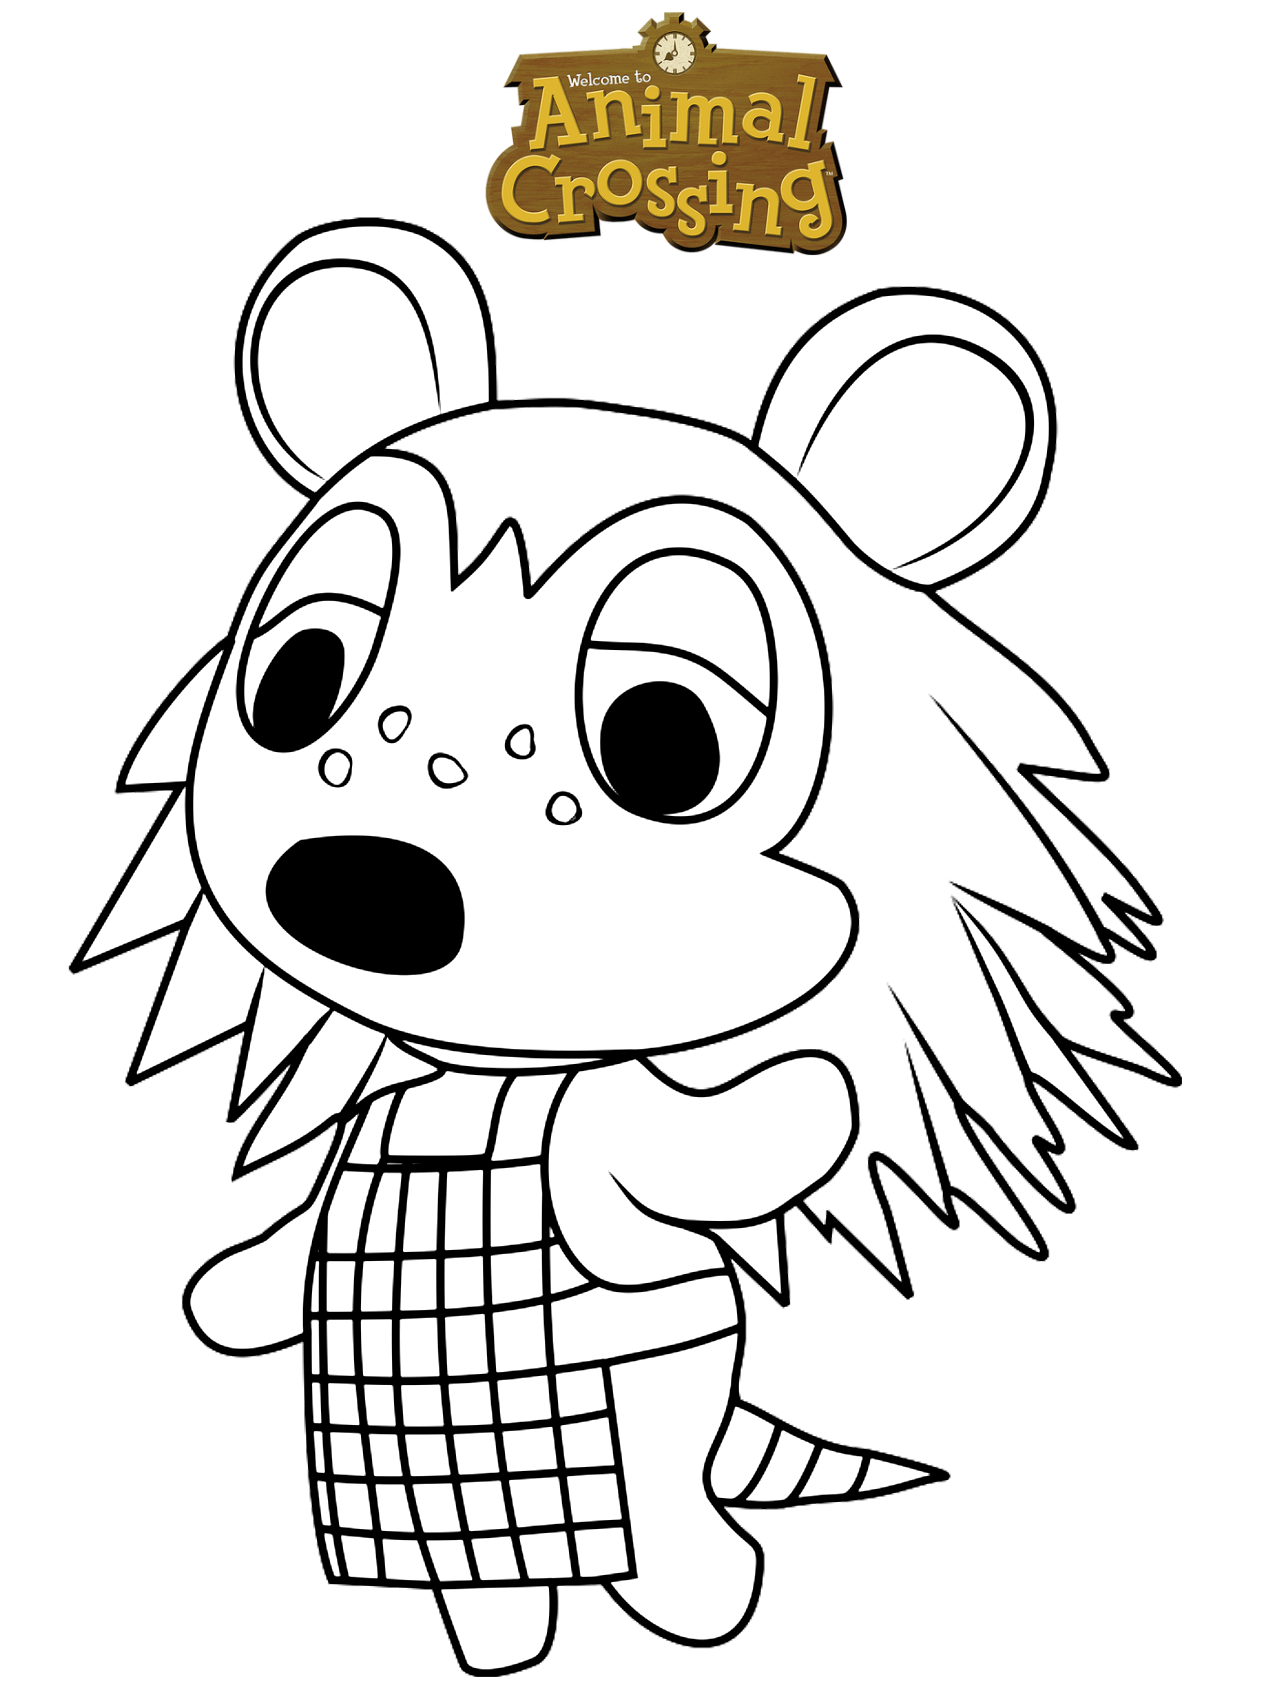 sable Animal Crossing Coloring Pages